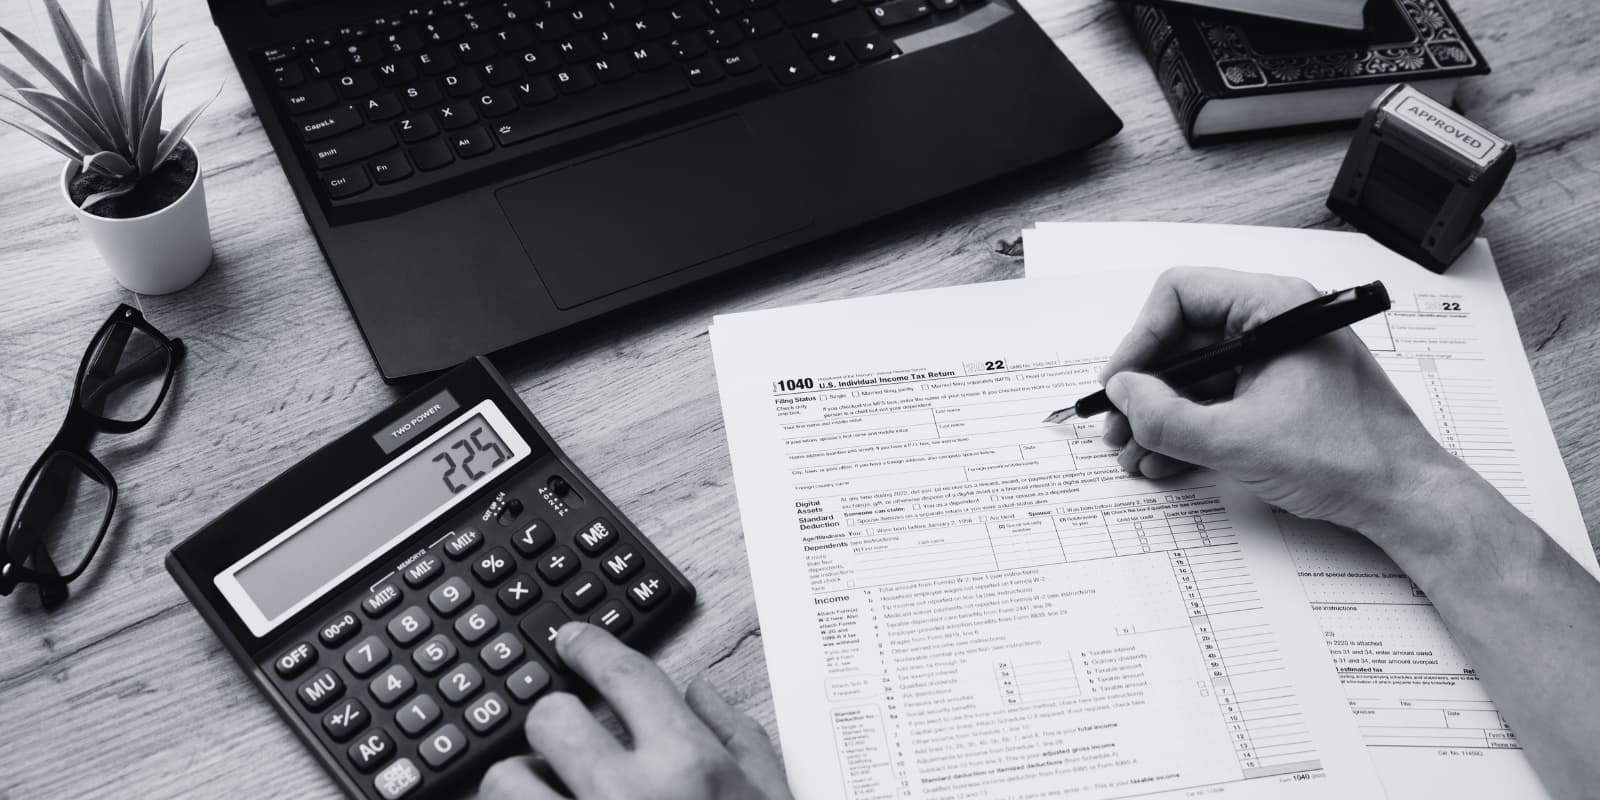 New Corporate Tax (Cit) Return Form Released In The Uae